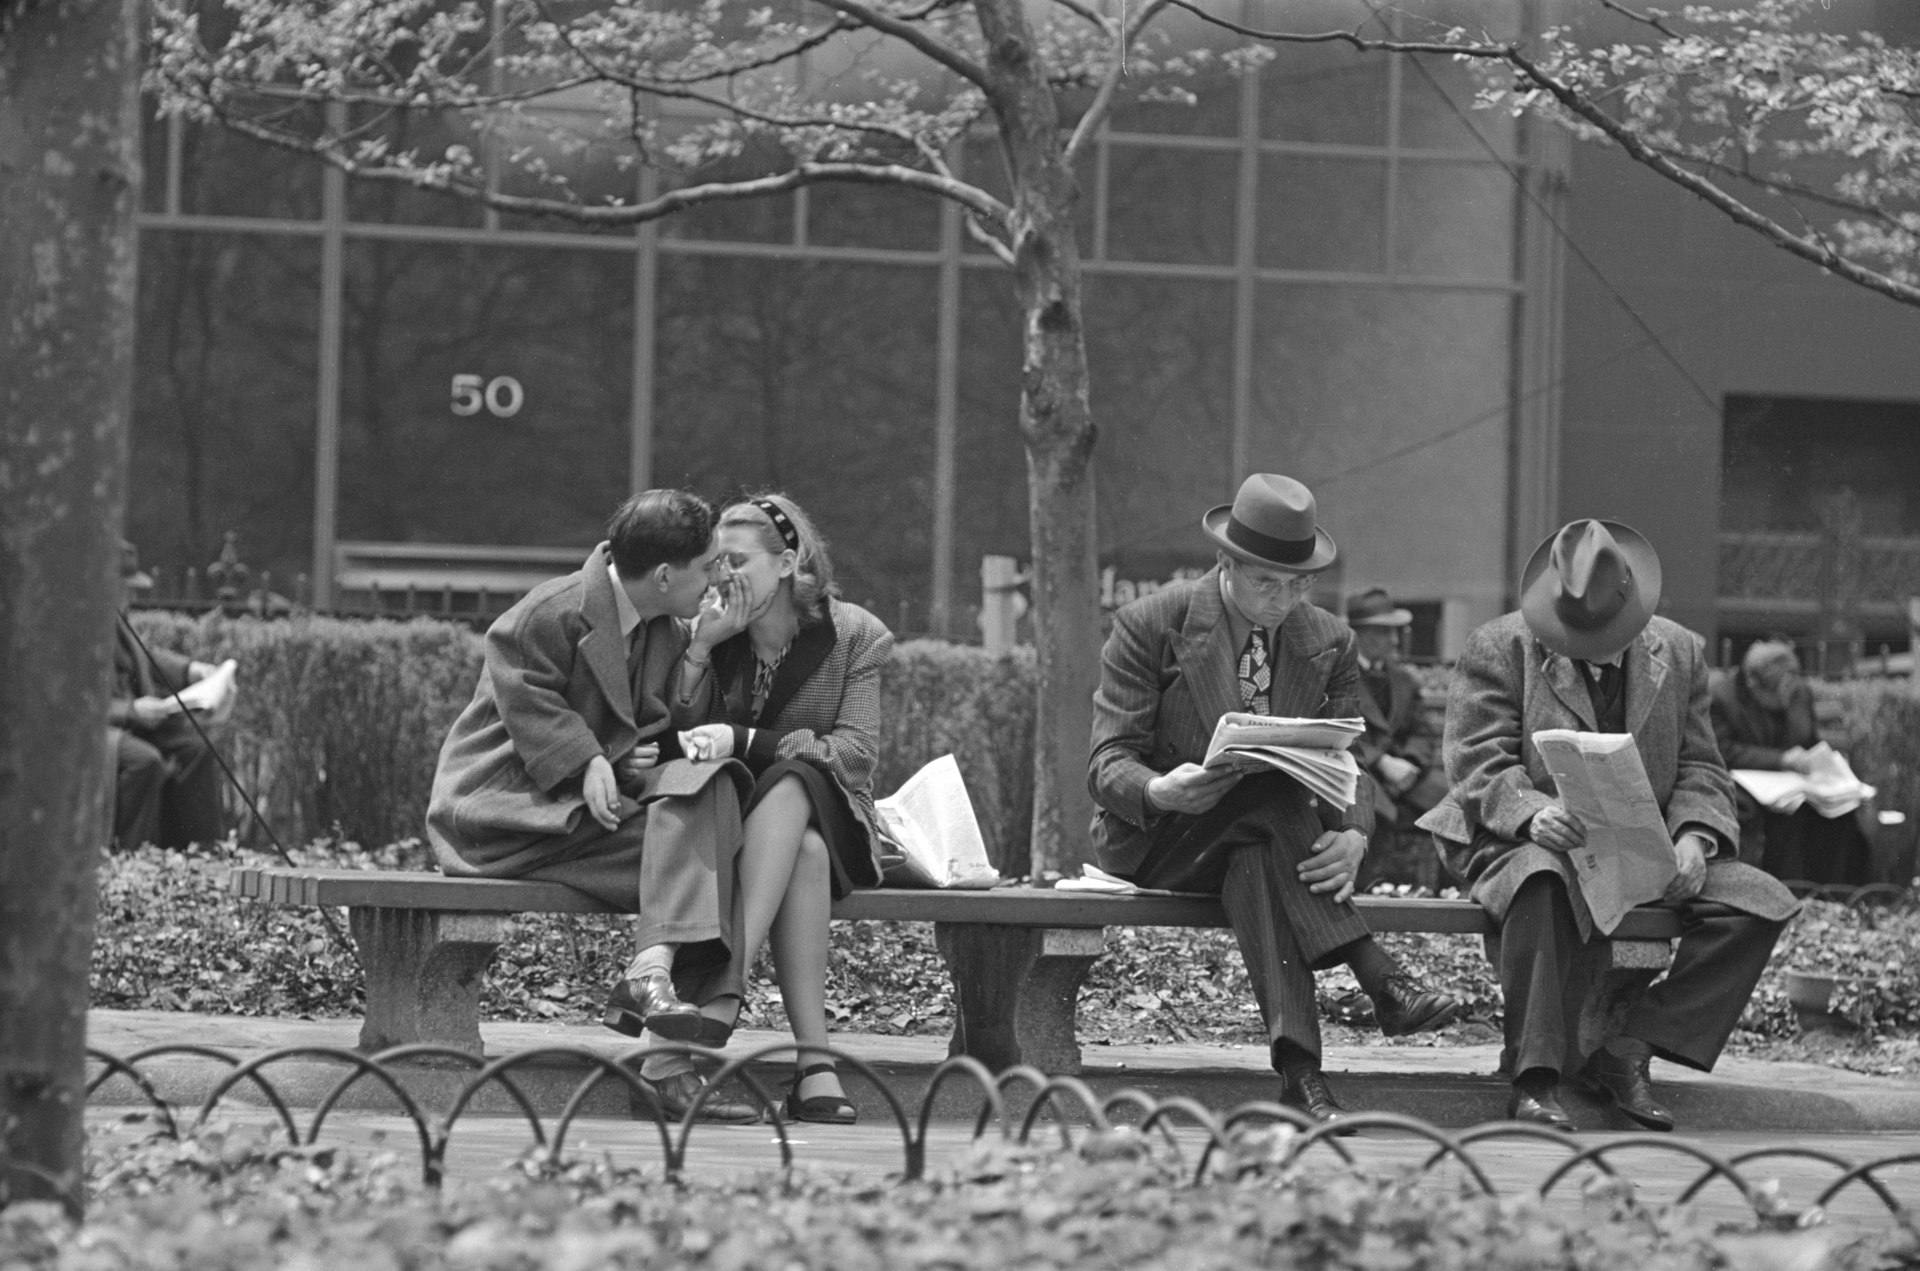 Stanley Kubrick, from “Park Benches: Love is Everywhere”, 1946